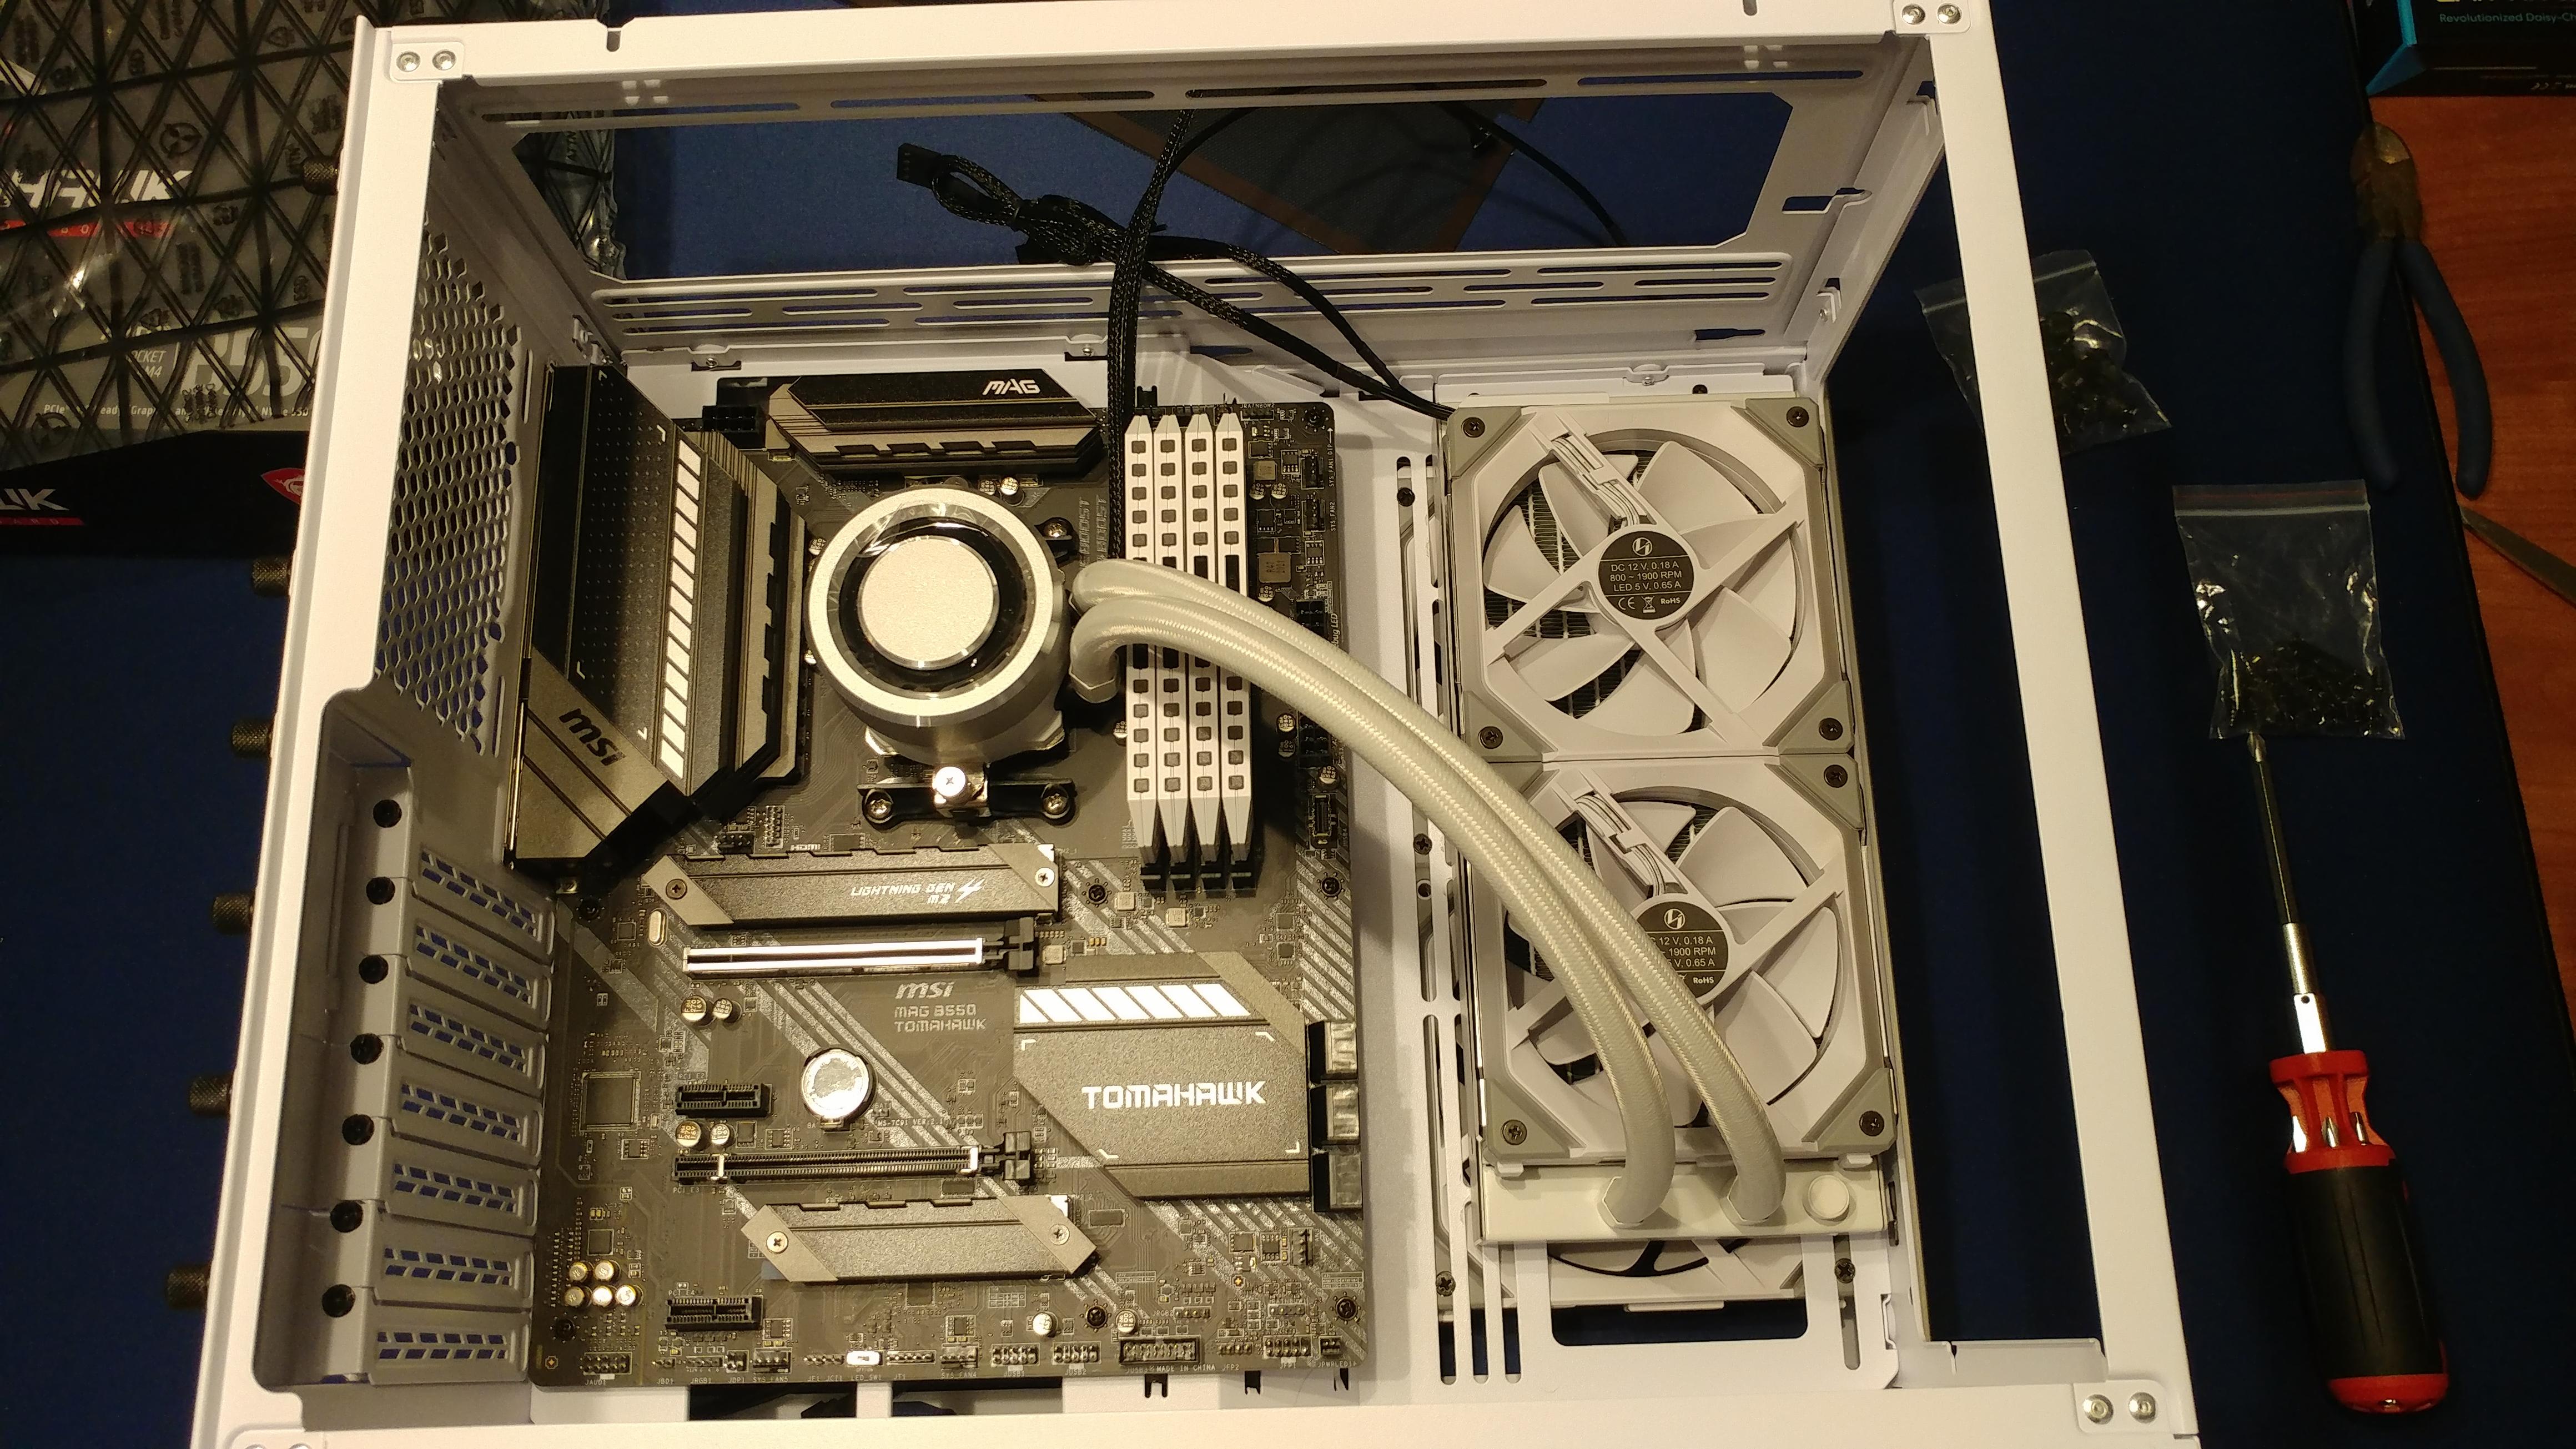 Motherboard gets installed in the case